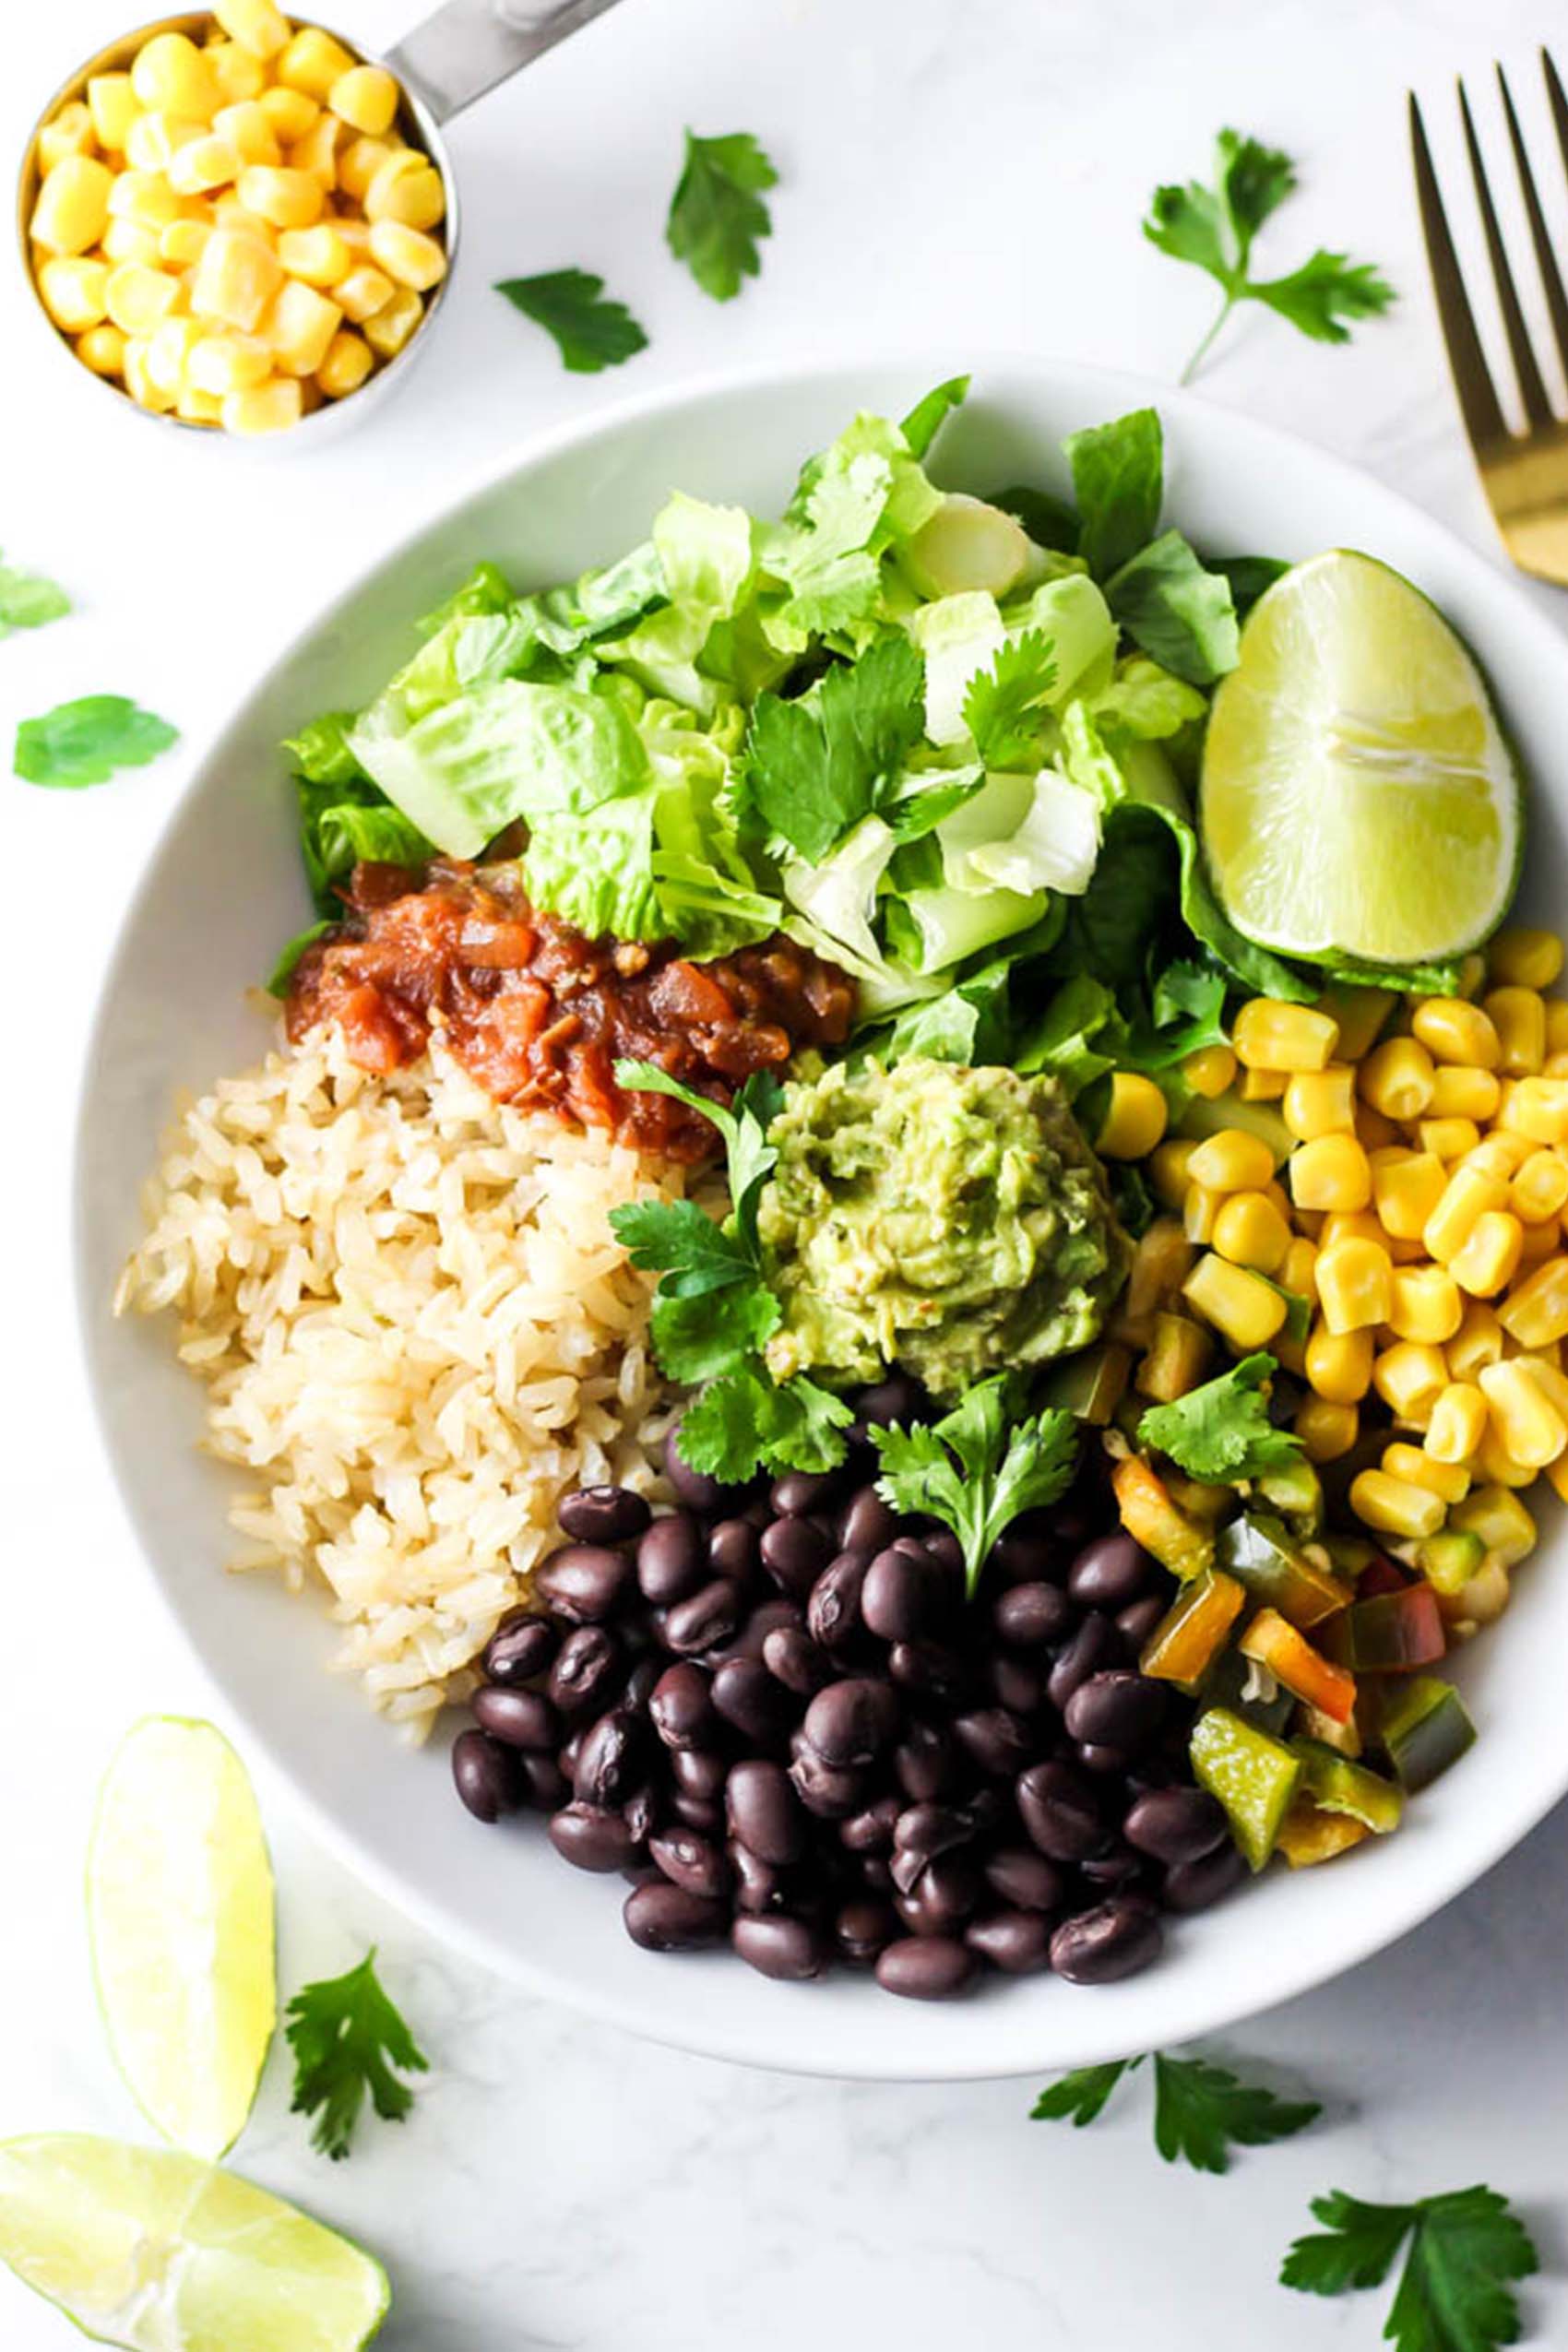 a vegan burrito bowl containing black beans, corn, lettuce, salsa, brown rice, guacamole and a wedge of lime